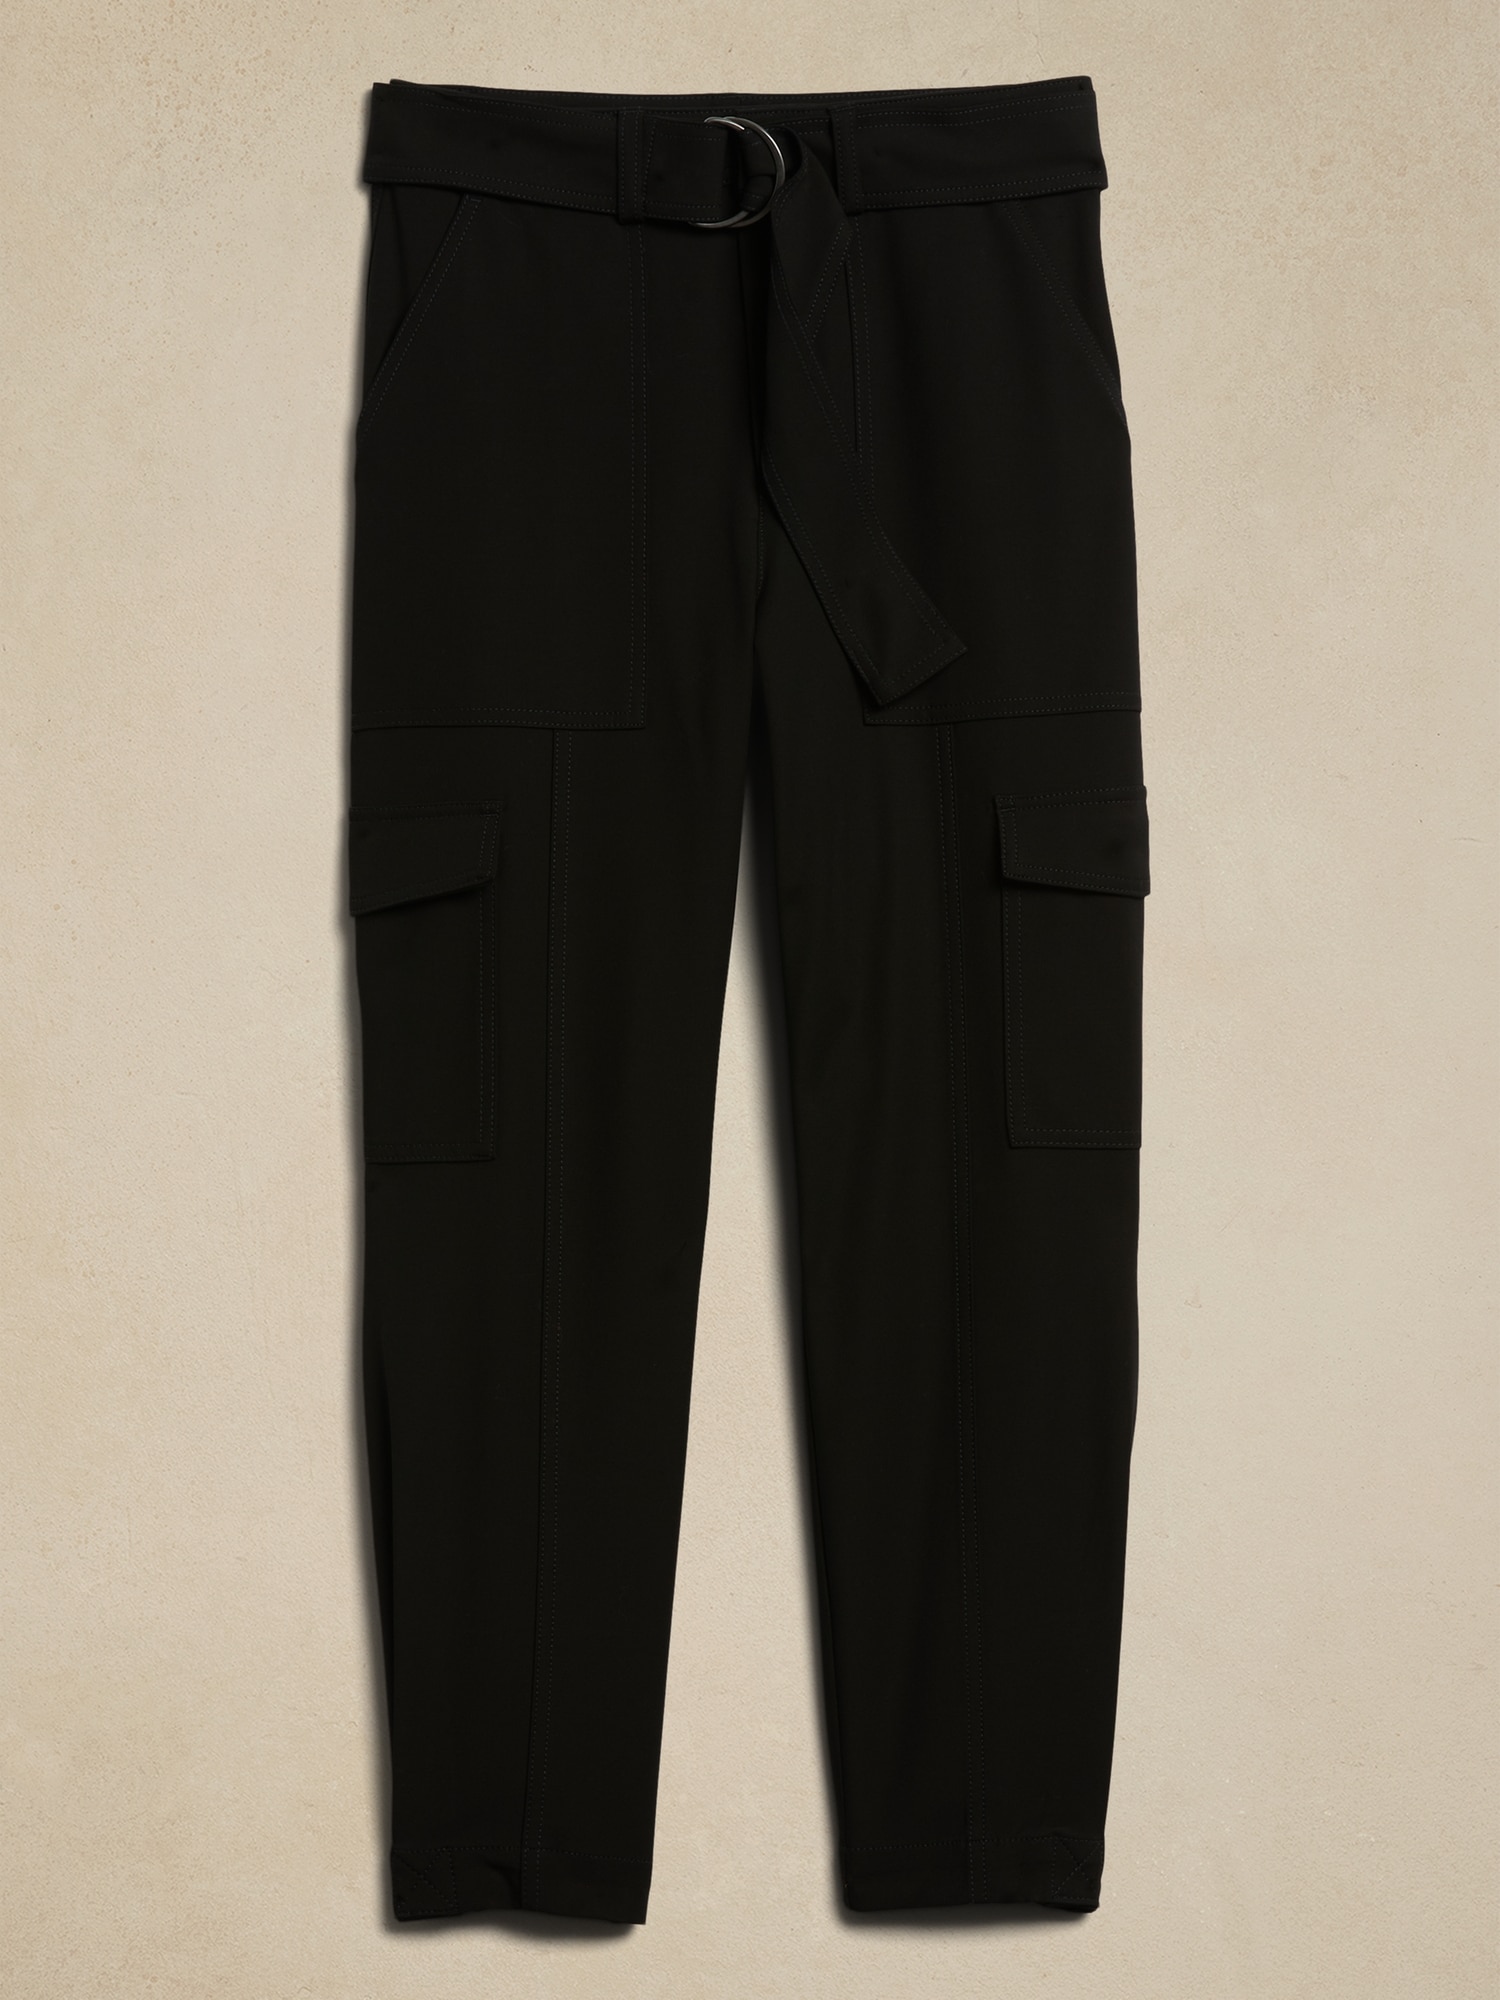 Banana Republic High-Rise Tapered Cargo Pant, BLACK SIZE 14L #746693 W0707H